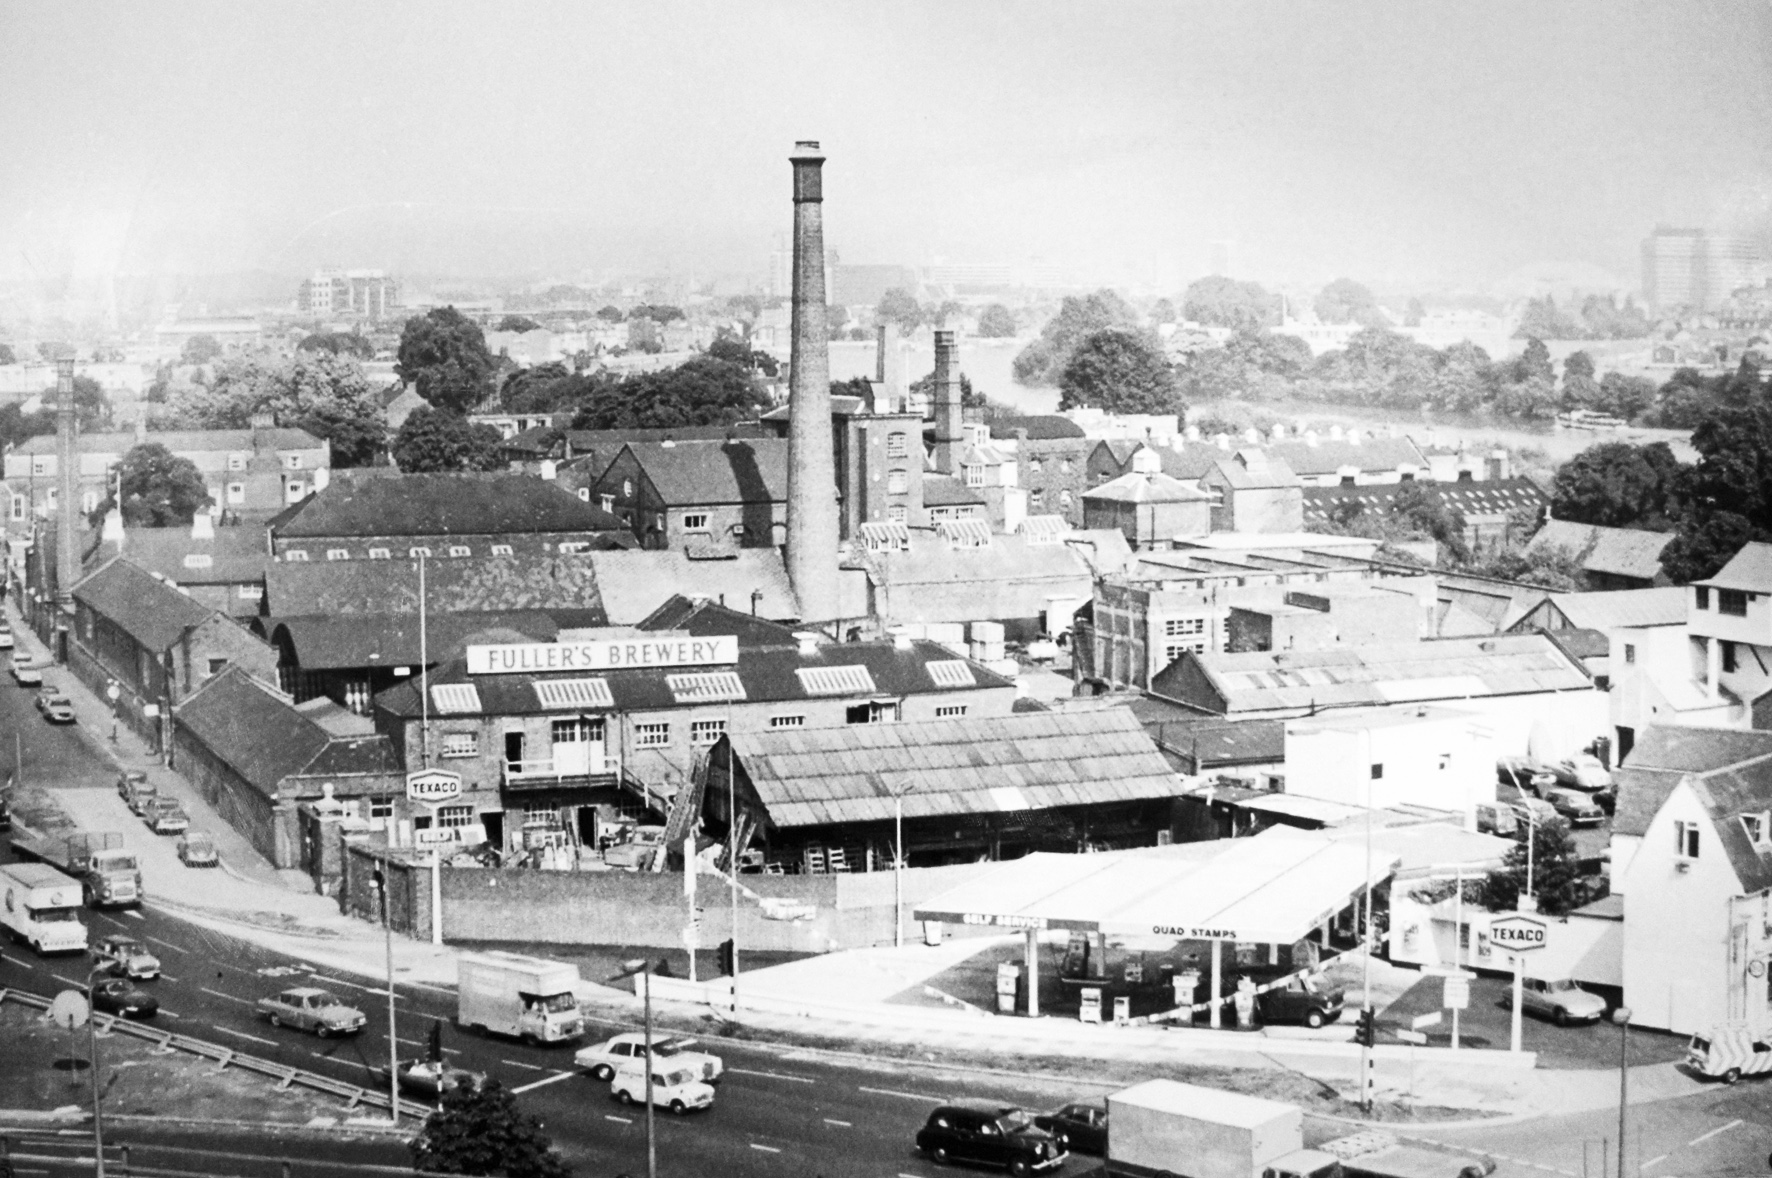 The Griffin Brewery circa 1965